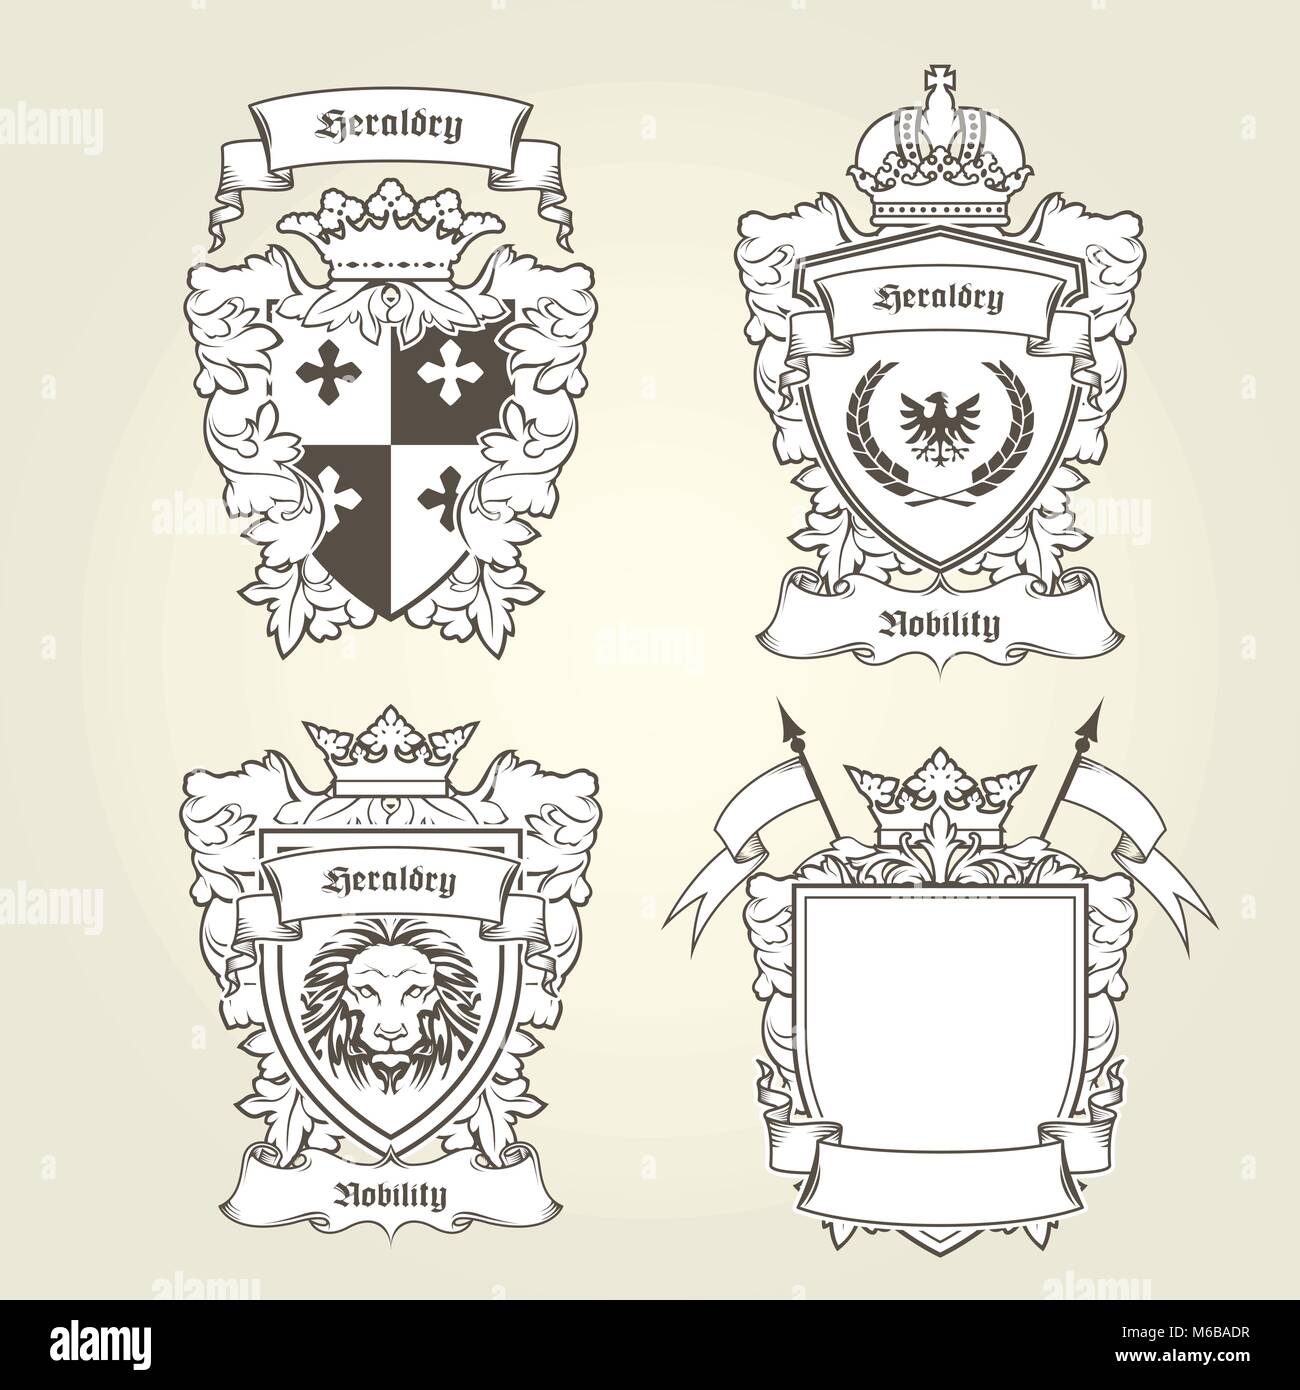 Details about   Stettenberg-Stettenberg COAT OF ARMS HERALDRY BLAZONRY PRINT 